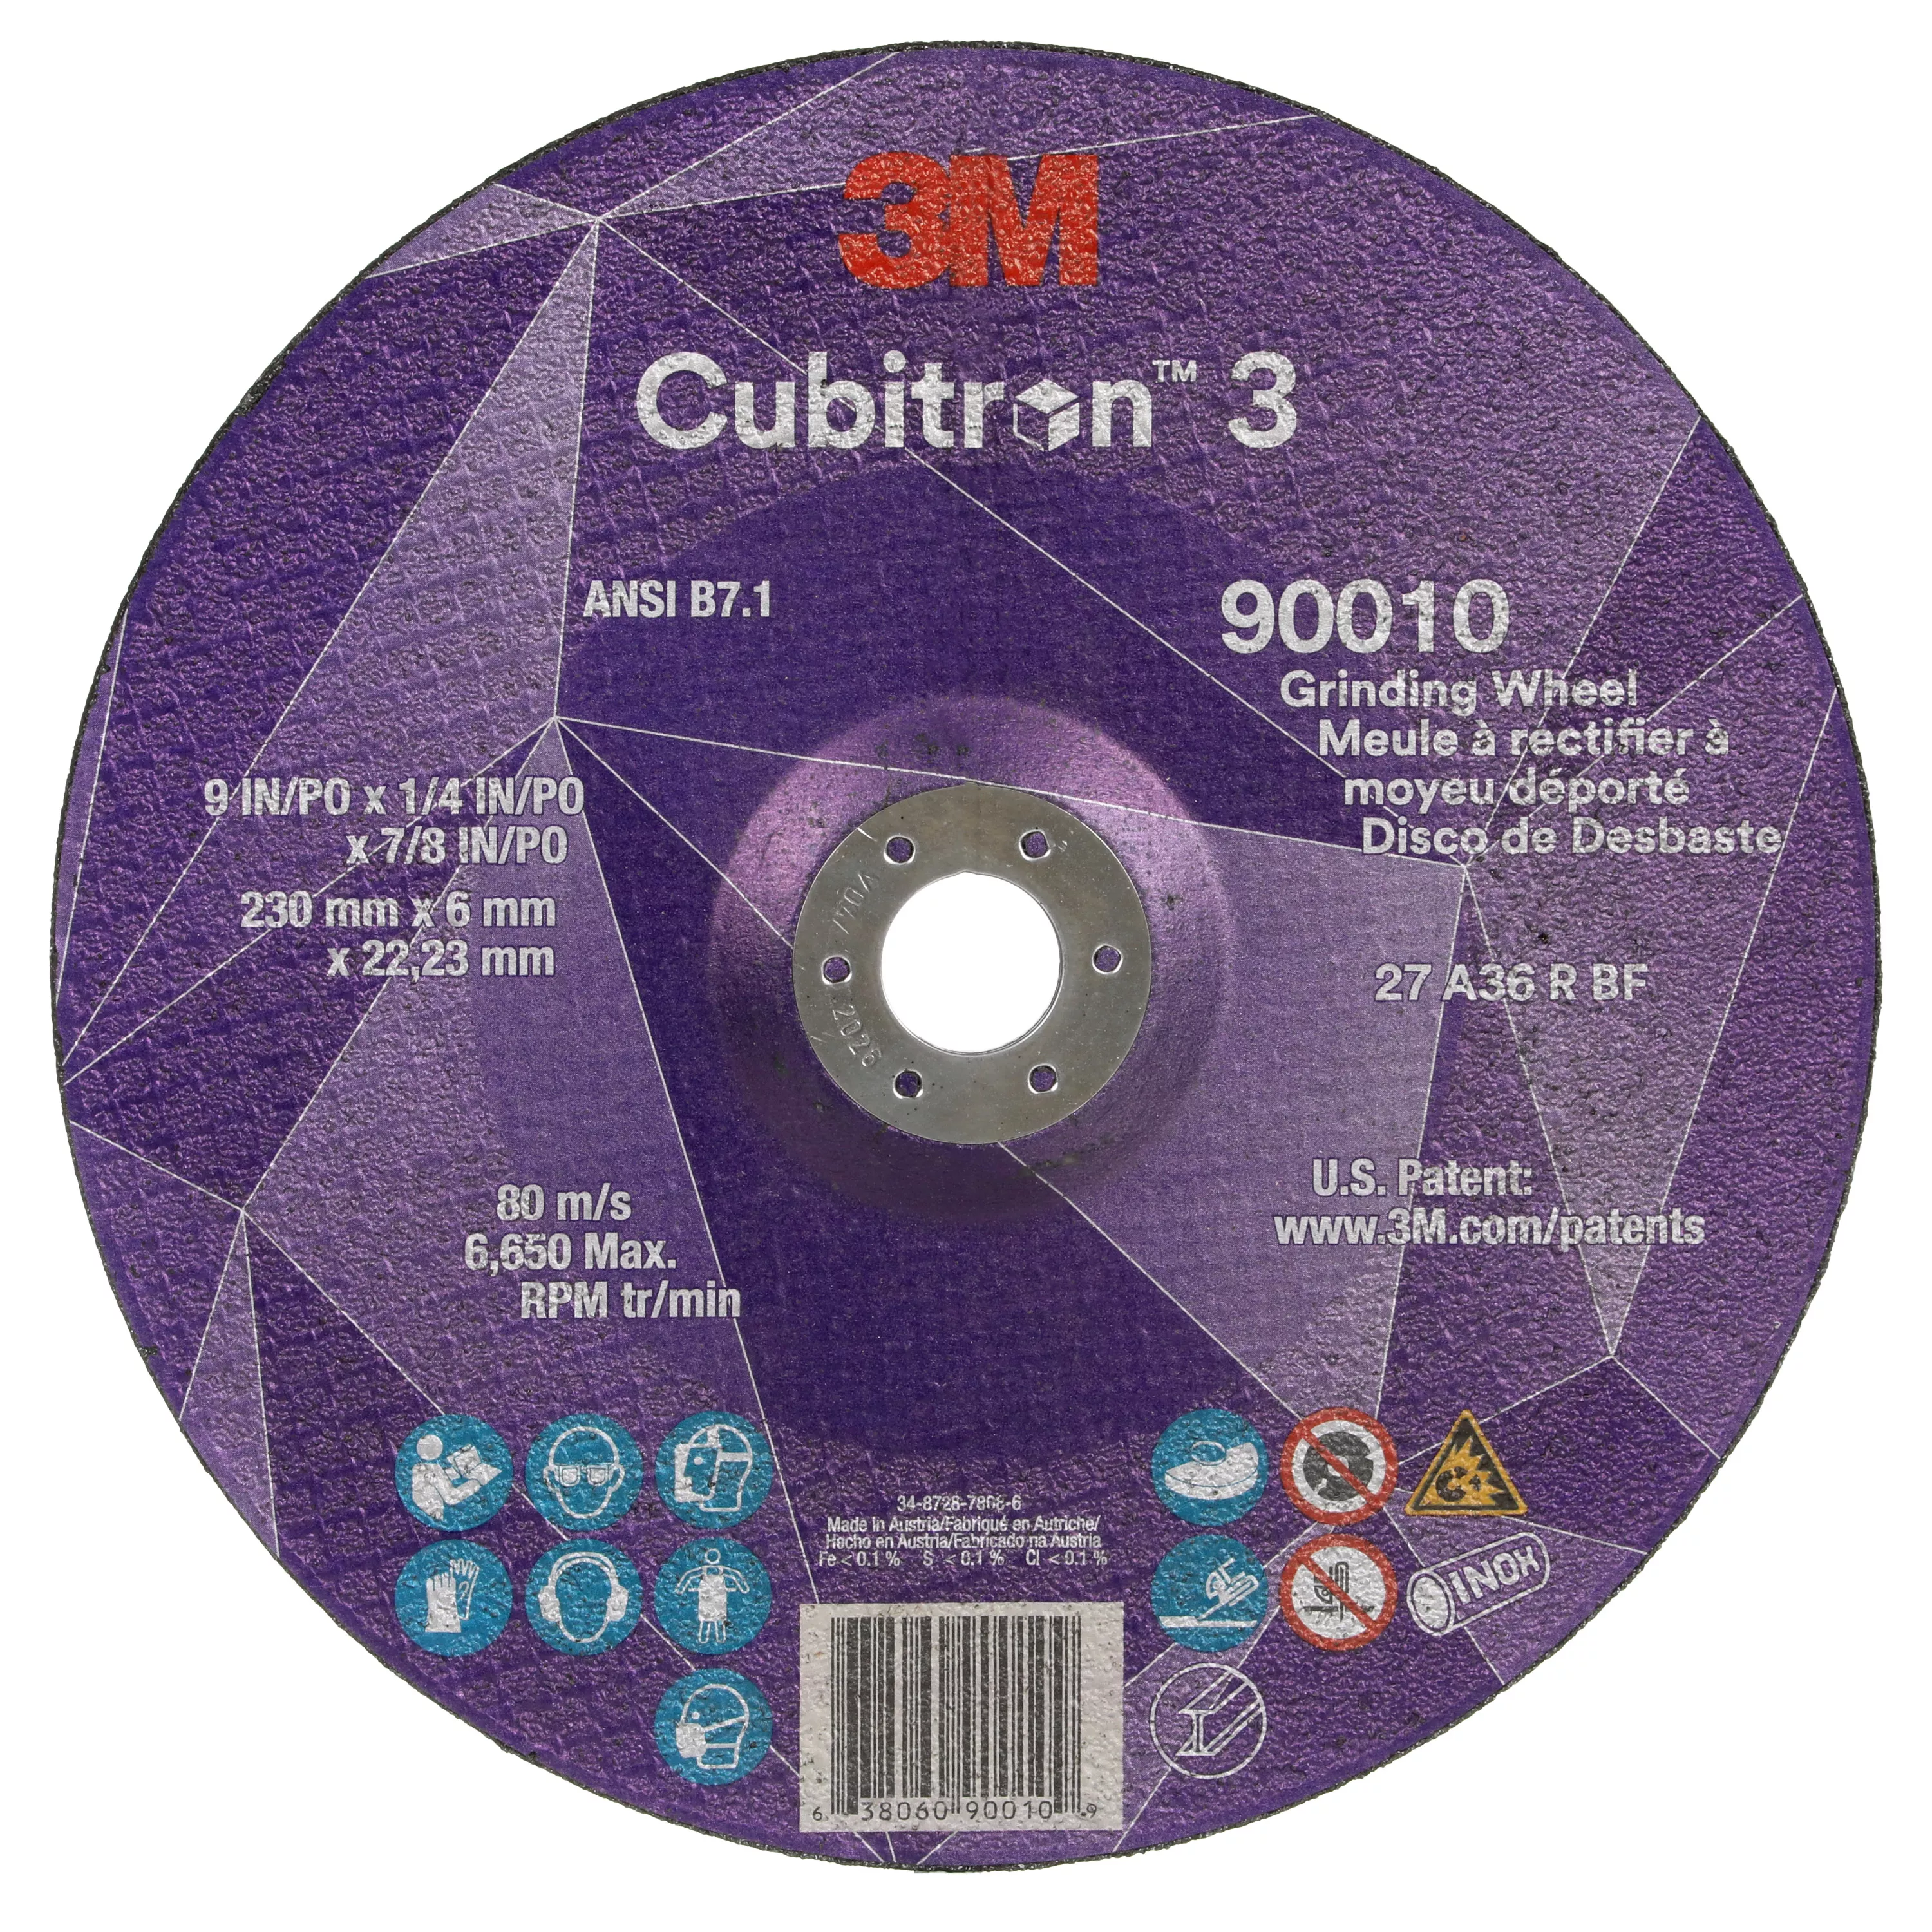 3M™ Cubitron™ 3 Depressed Center Grinding Wheel, 90010, 36+, T27, 9 in x
1/4 in x 7/8 in (230x6x22.23mm) ANSI, 10/Pack, 20 ea/Case